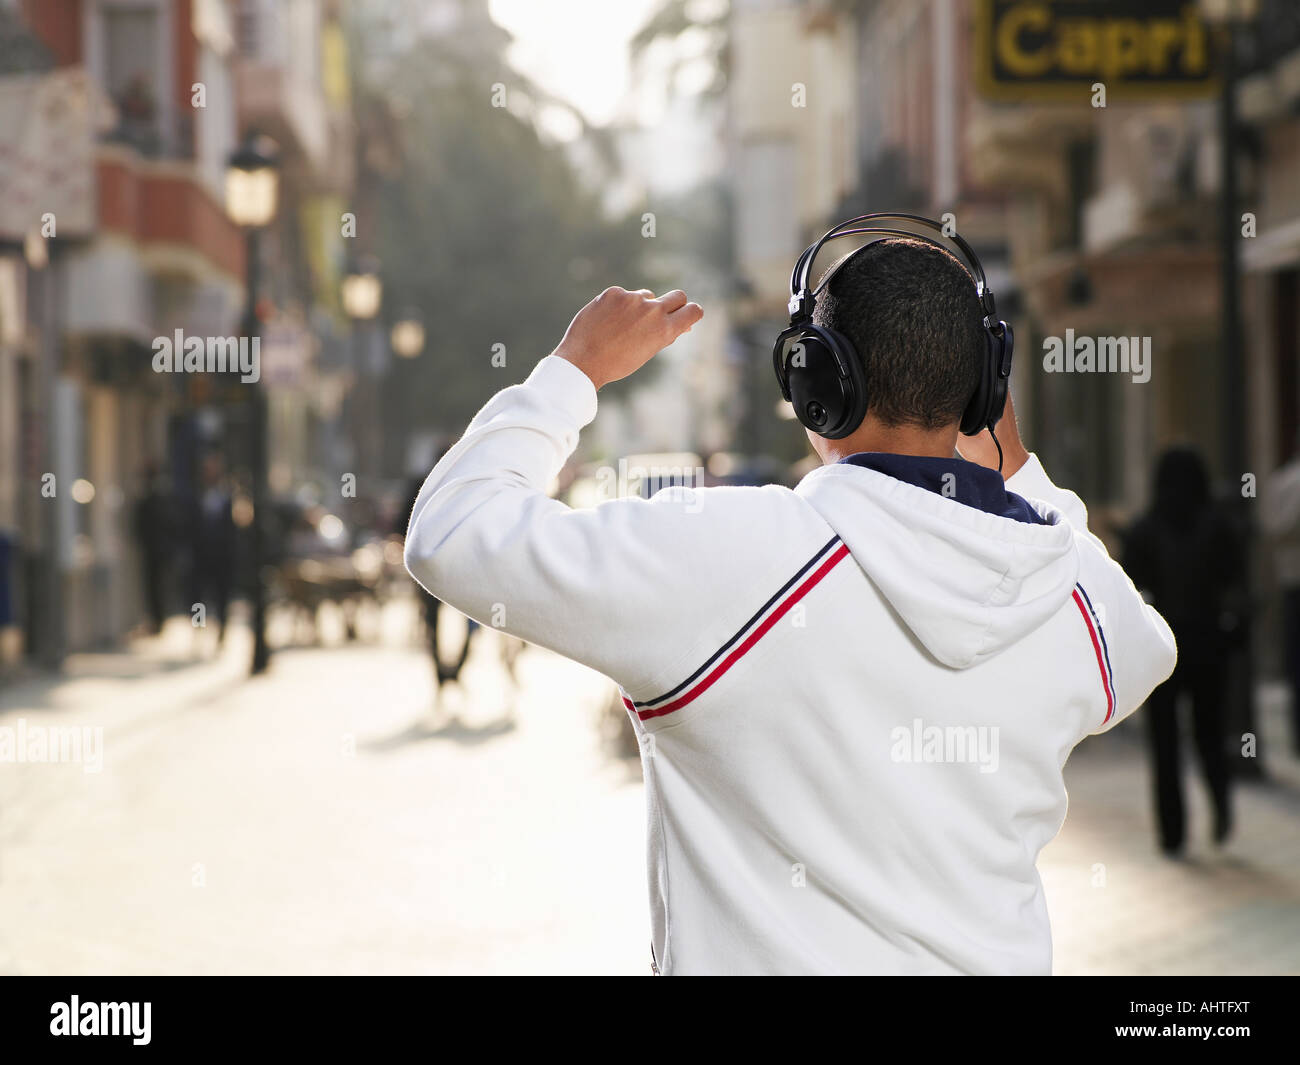 Young man standing in street wearing headphones, rear view Stock Photo